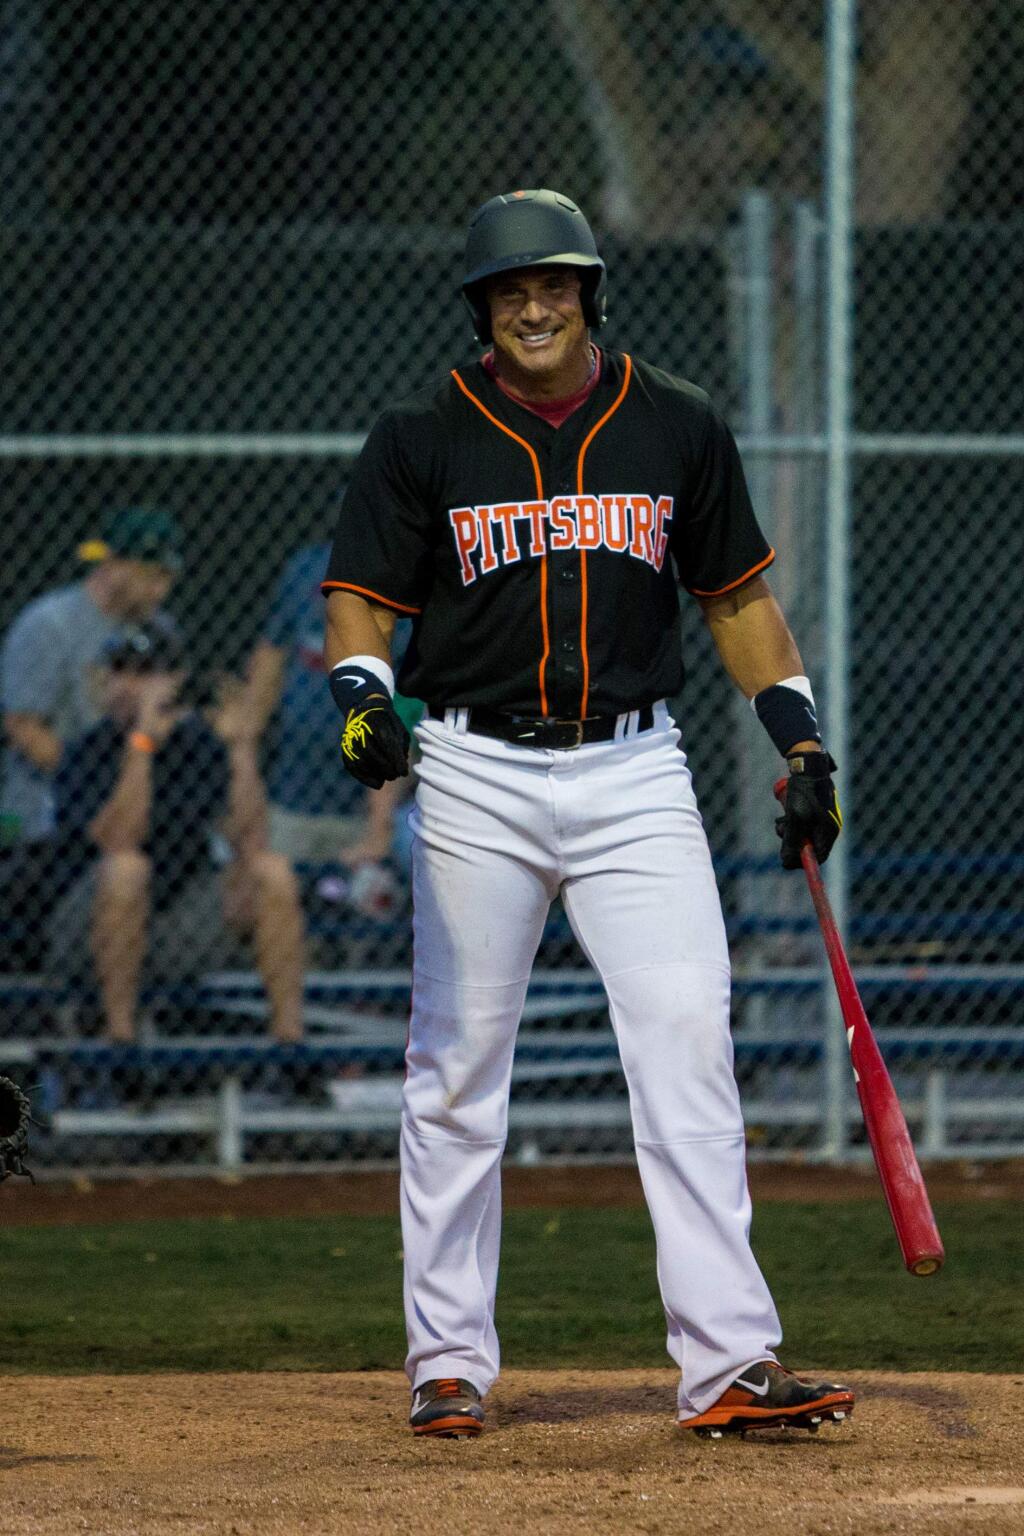 (Nicole Barton Photography)Jose Canseco, former Major League Baseball star who briefly played with the Sonoma Stompers last year, has signed with the Pittsburg Diamonds for the remainder of the season. He is expected to see action against his old Stompers teammates this weekend in Pittsburg.